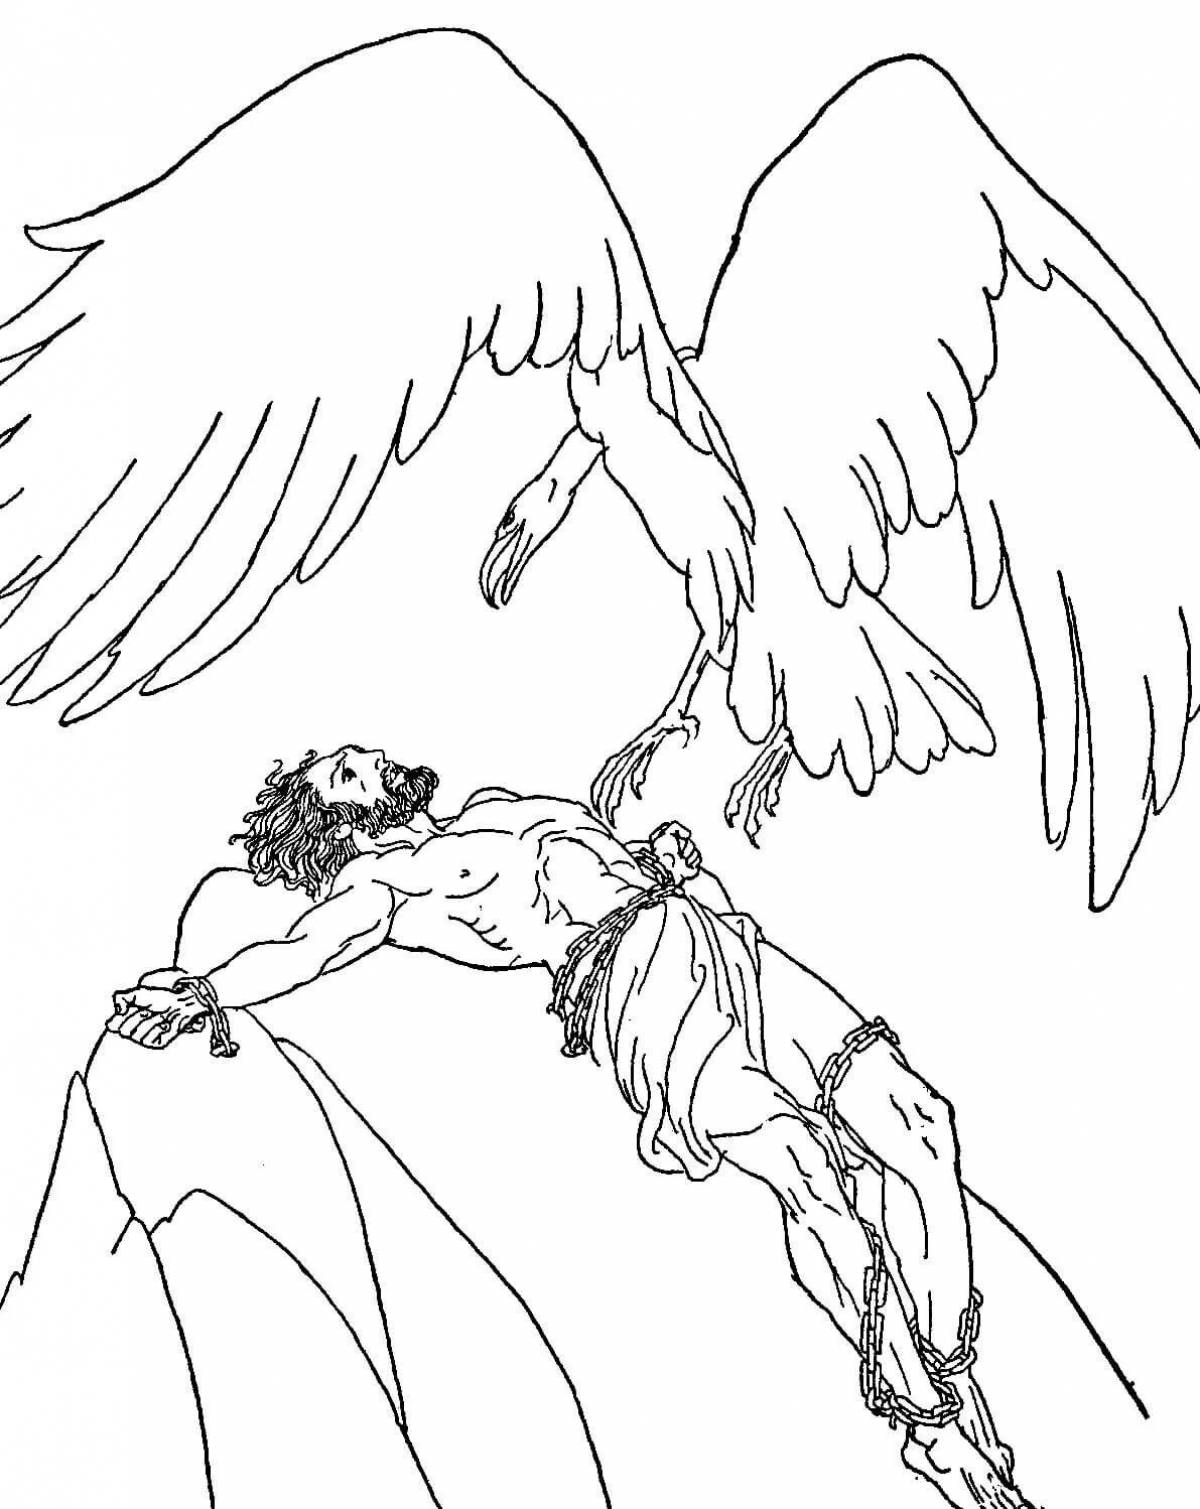 Colorfully improved Daedalus and Icarus coloring page